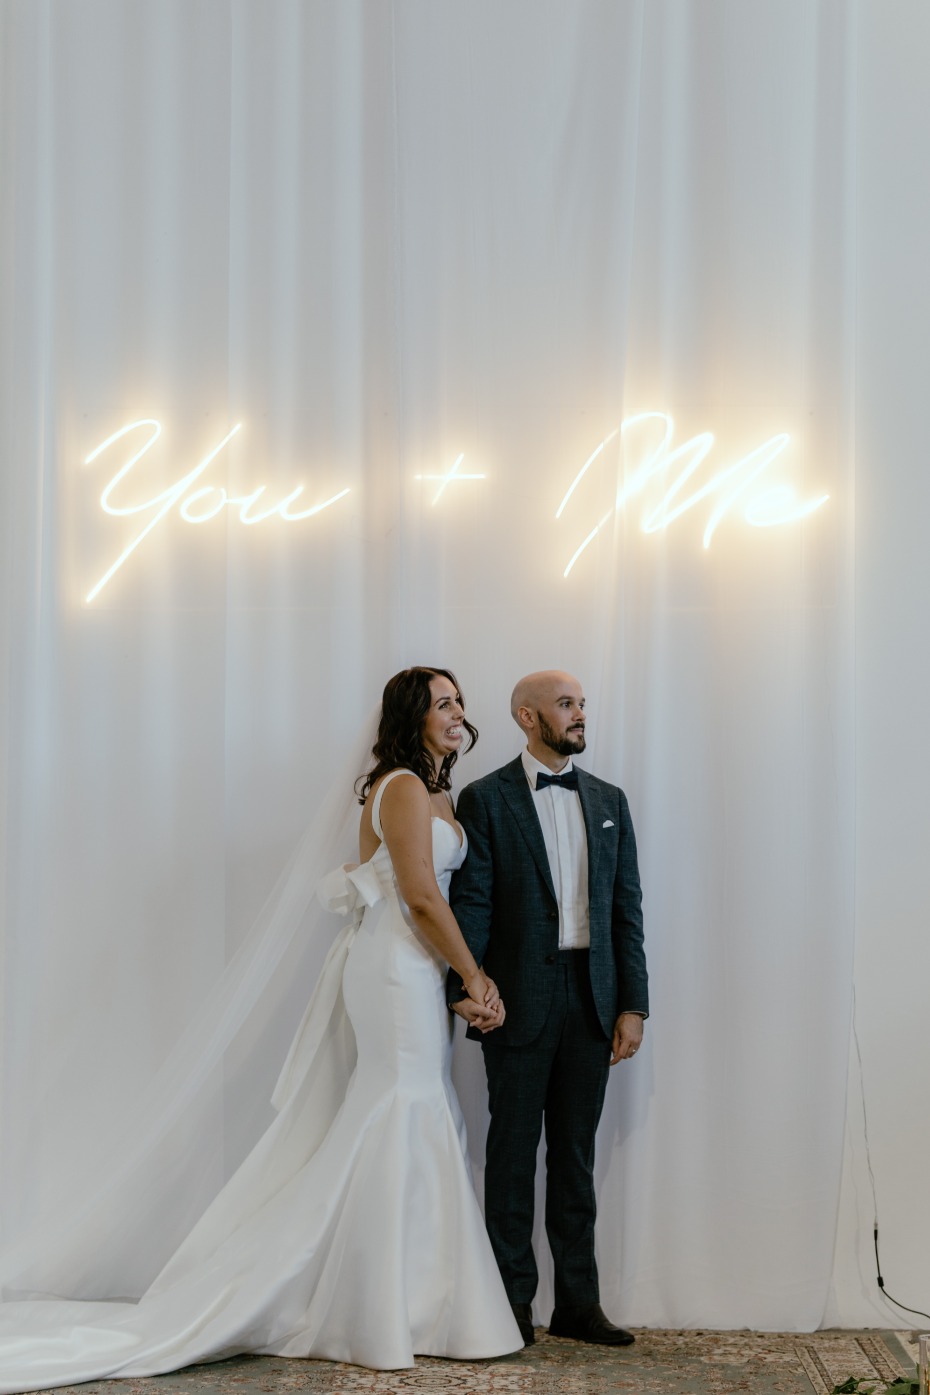 Yes, You Do Need a Neon Sign for Your Nuptials